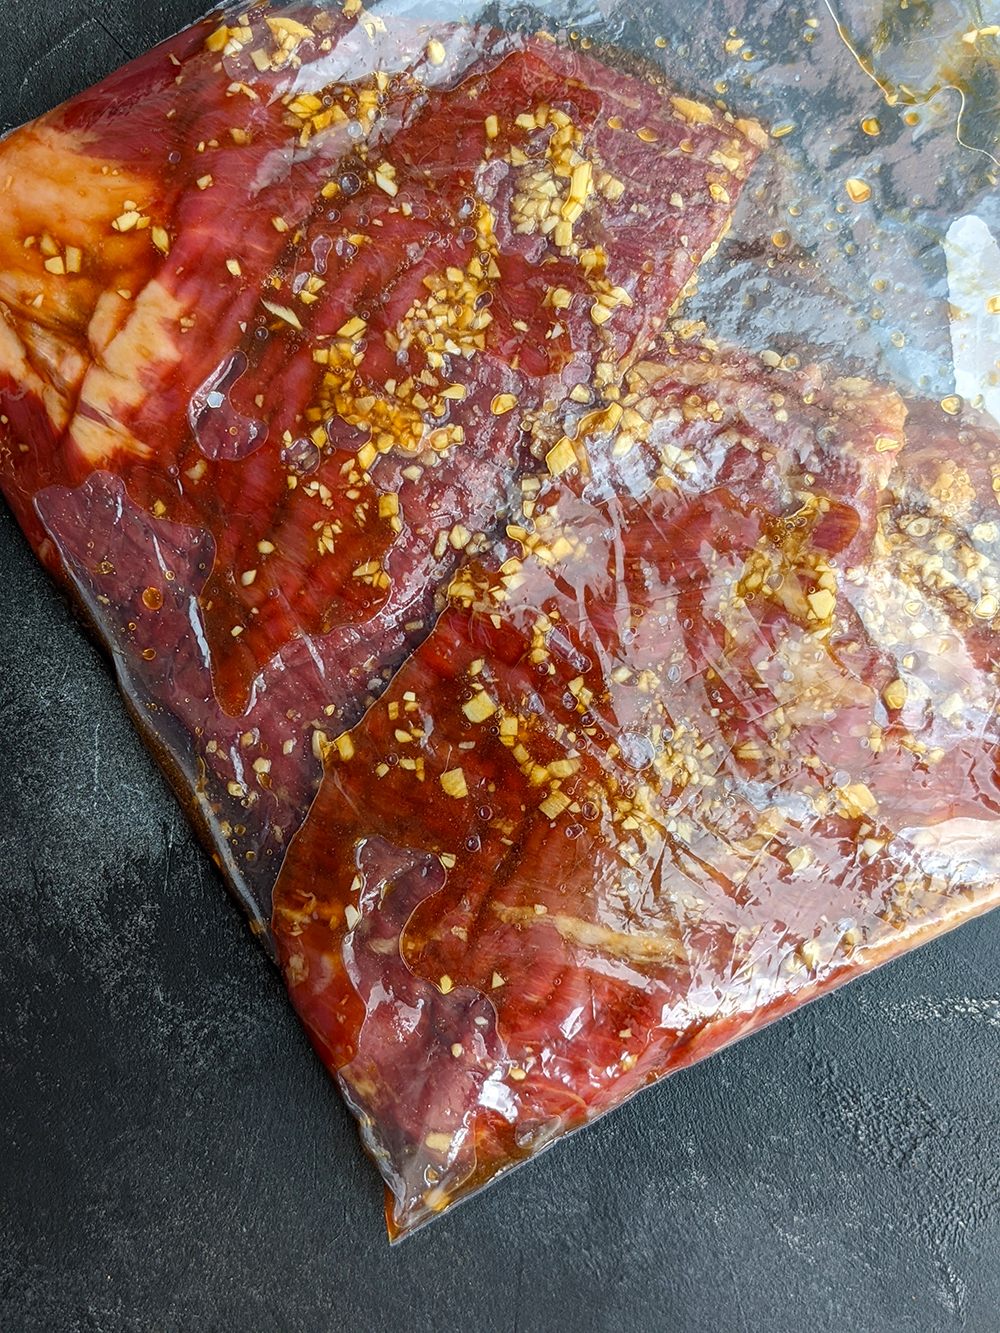 Place the flank steak and the marinade (coconut aminos, garlic, ginger, and sesame oil) in a large Ziploc bag or vacuum sealer bag (cut the steak in half to fit in the bag if necessary). Move the contents around and allow the steak to be well coated with the marinade. Arrange in a single layer, squeeze the air out with your hands, and seal. Refrigerate and marinate for at least 2 hours or overnight. (You may also skip the marinating time and directly move on to the next step.) 